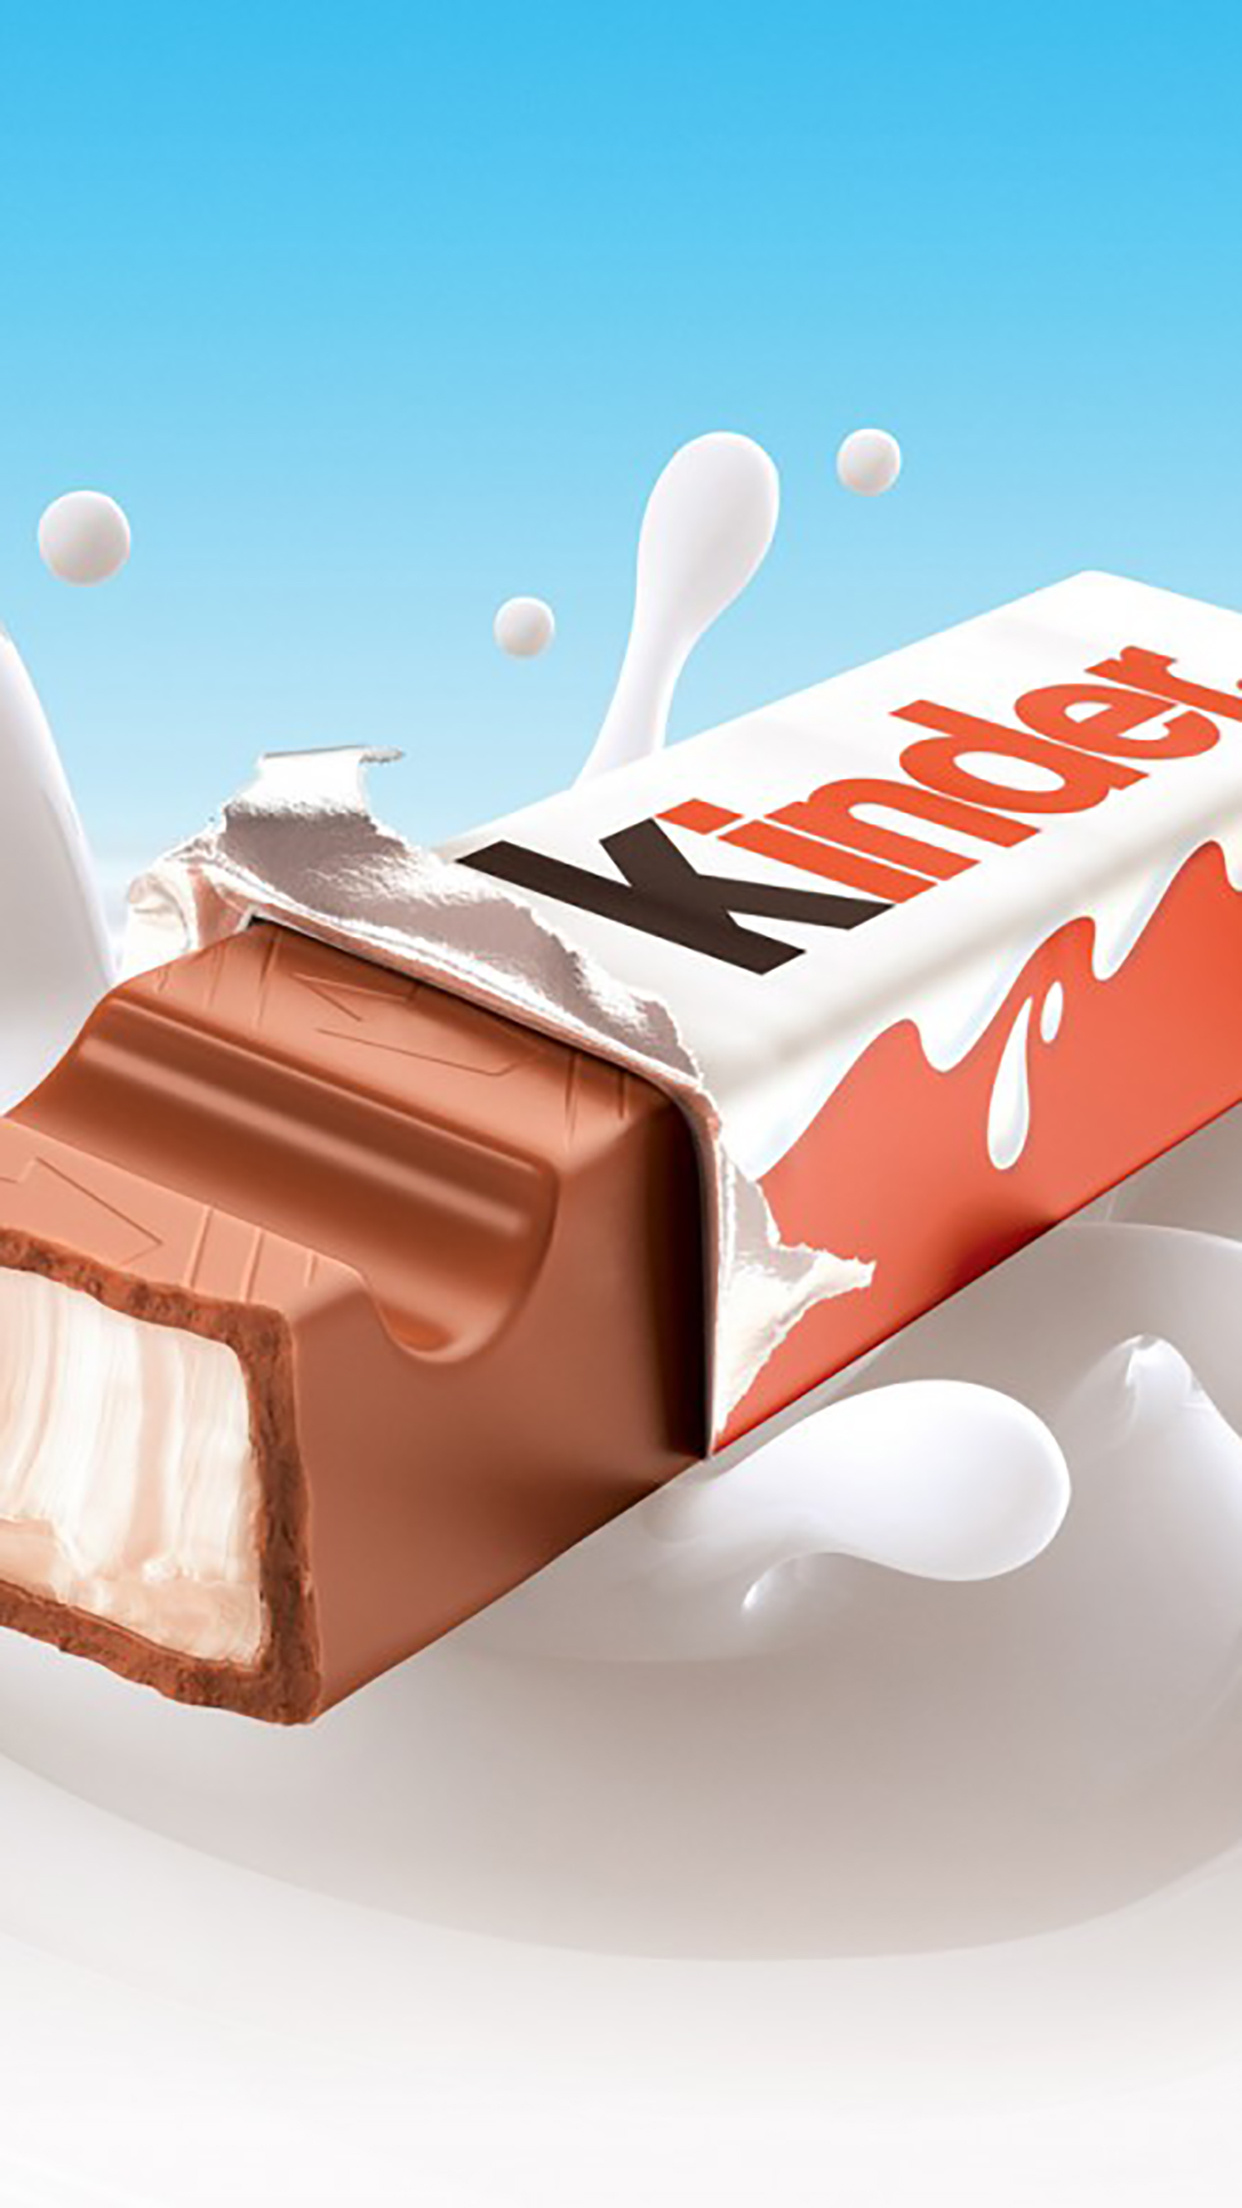 Kinder, Chocolate wallpaper, iPhone 11 Pro Max, Free download, 1250x2210 HD Phone